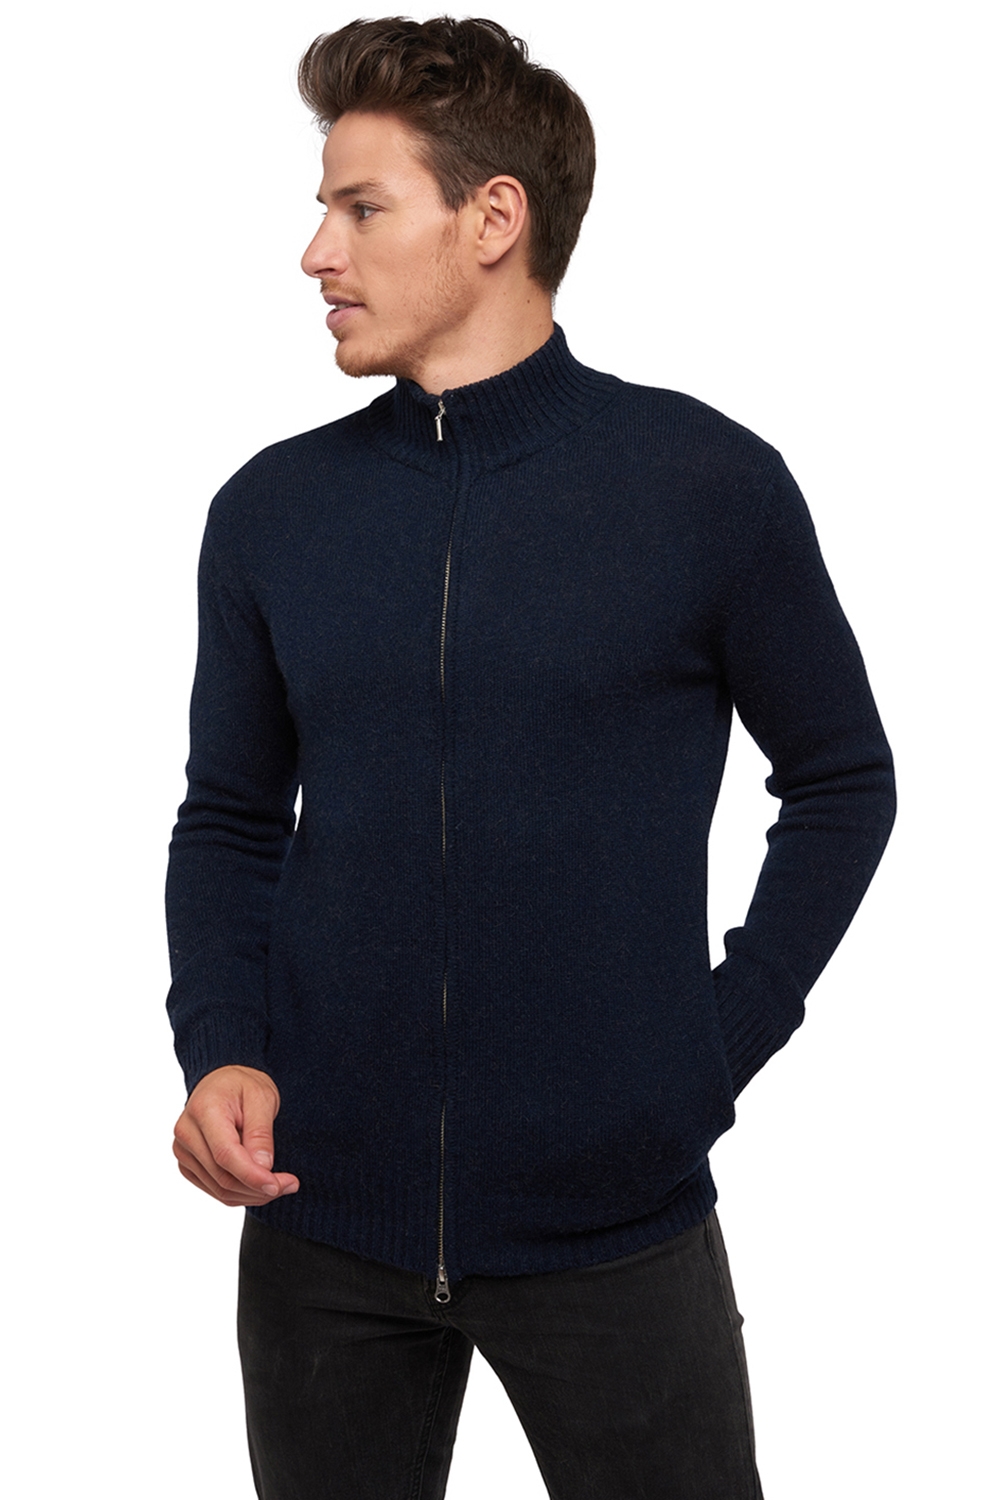 Chameau pull homme clyde marine 2xl